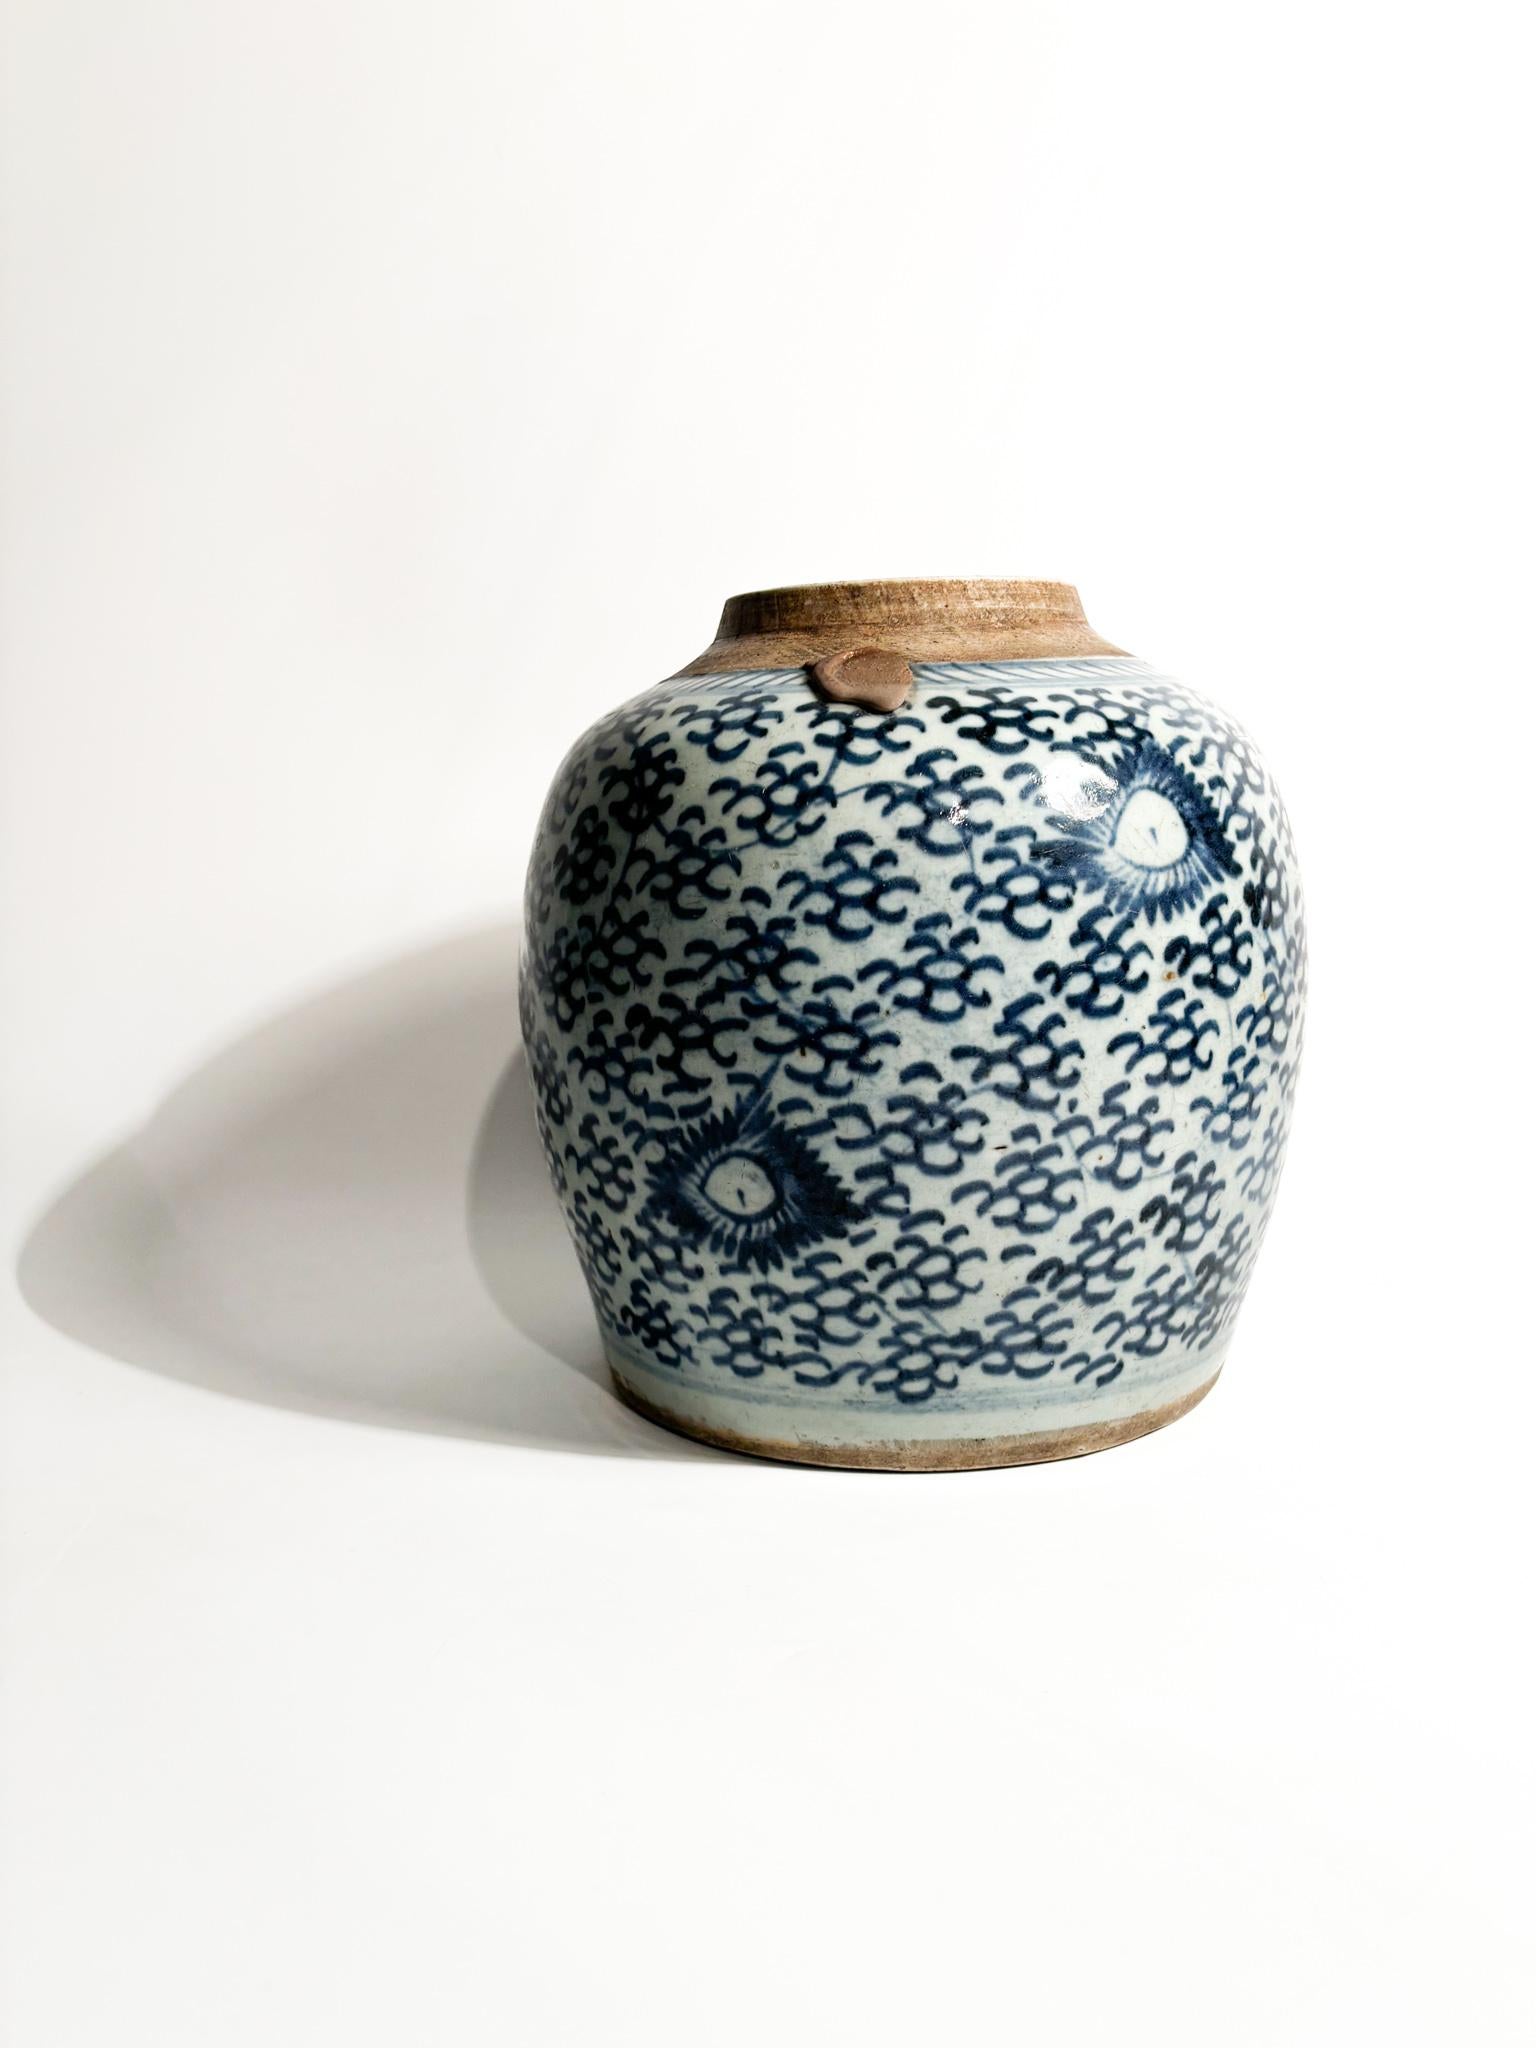 Chinese Export Chinese Ceramic Vase with Blue China Decorations from the 1950s For Sale